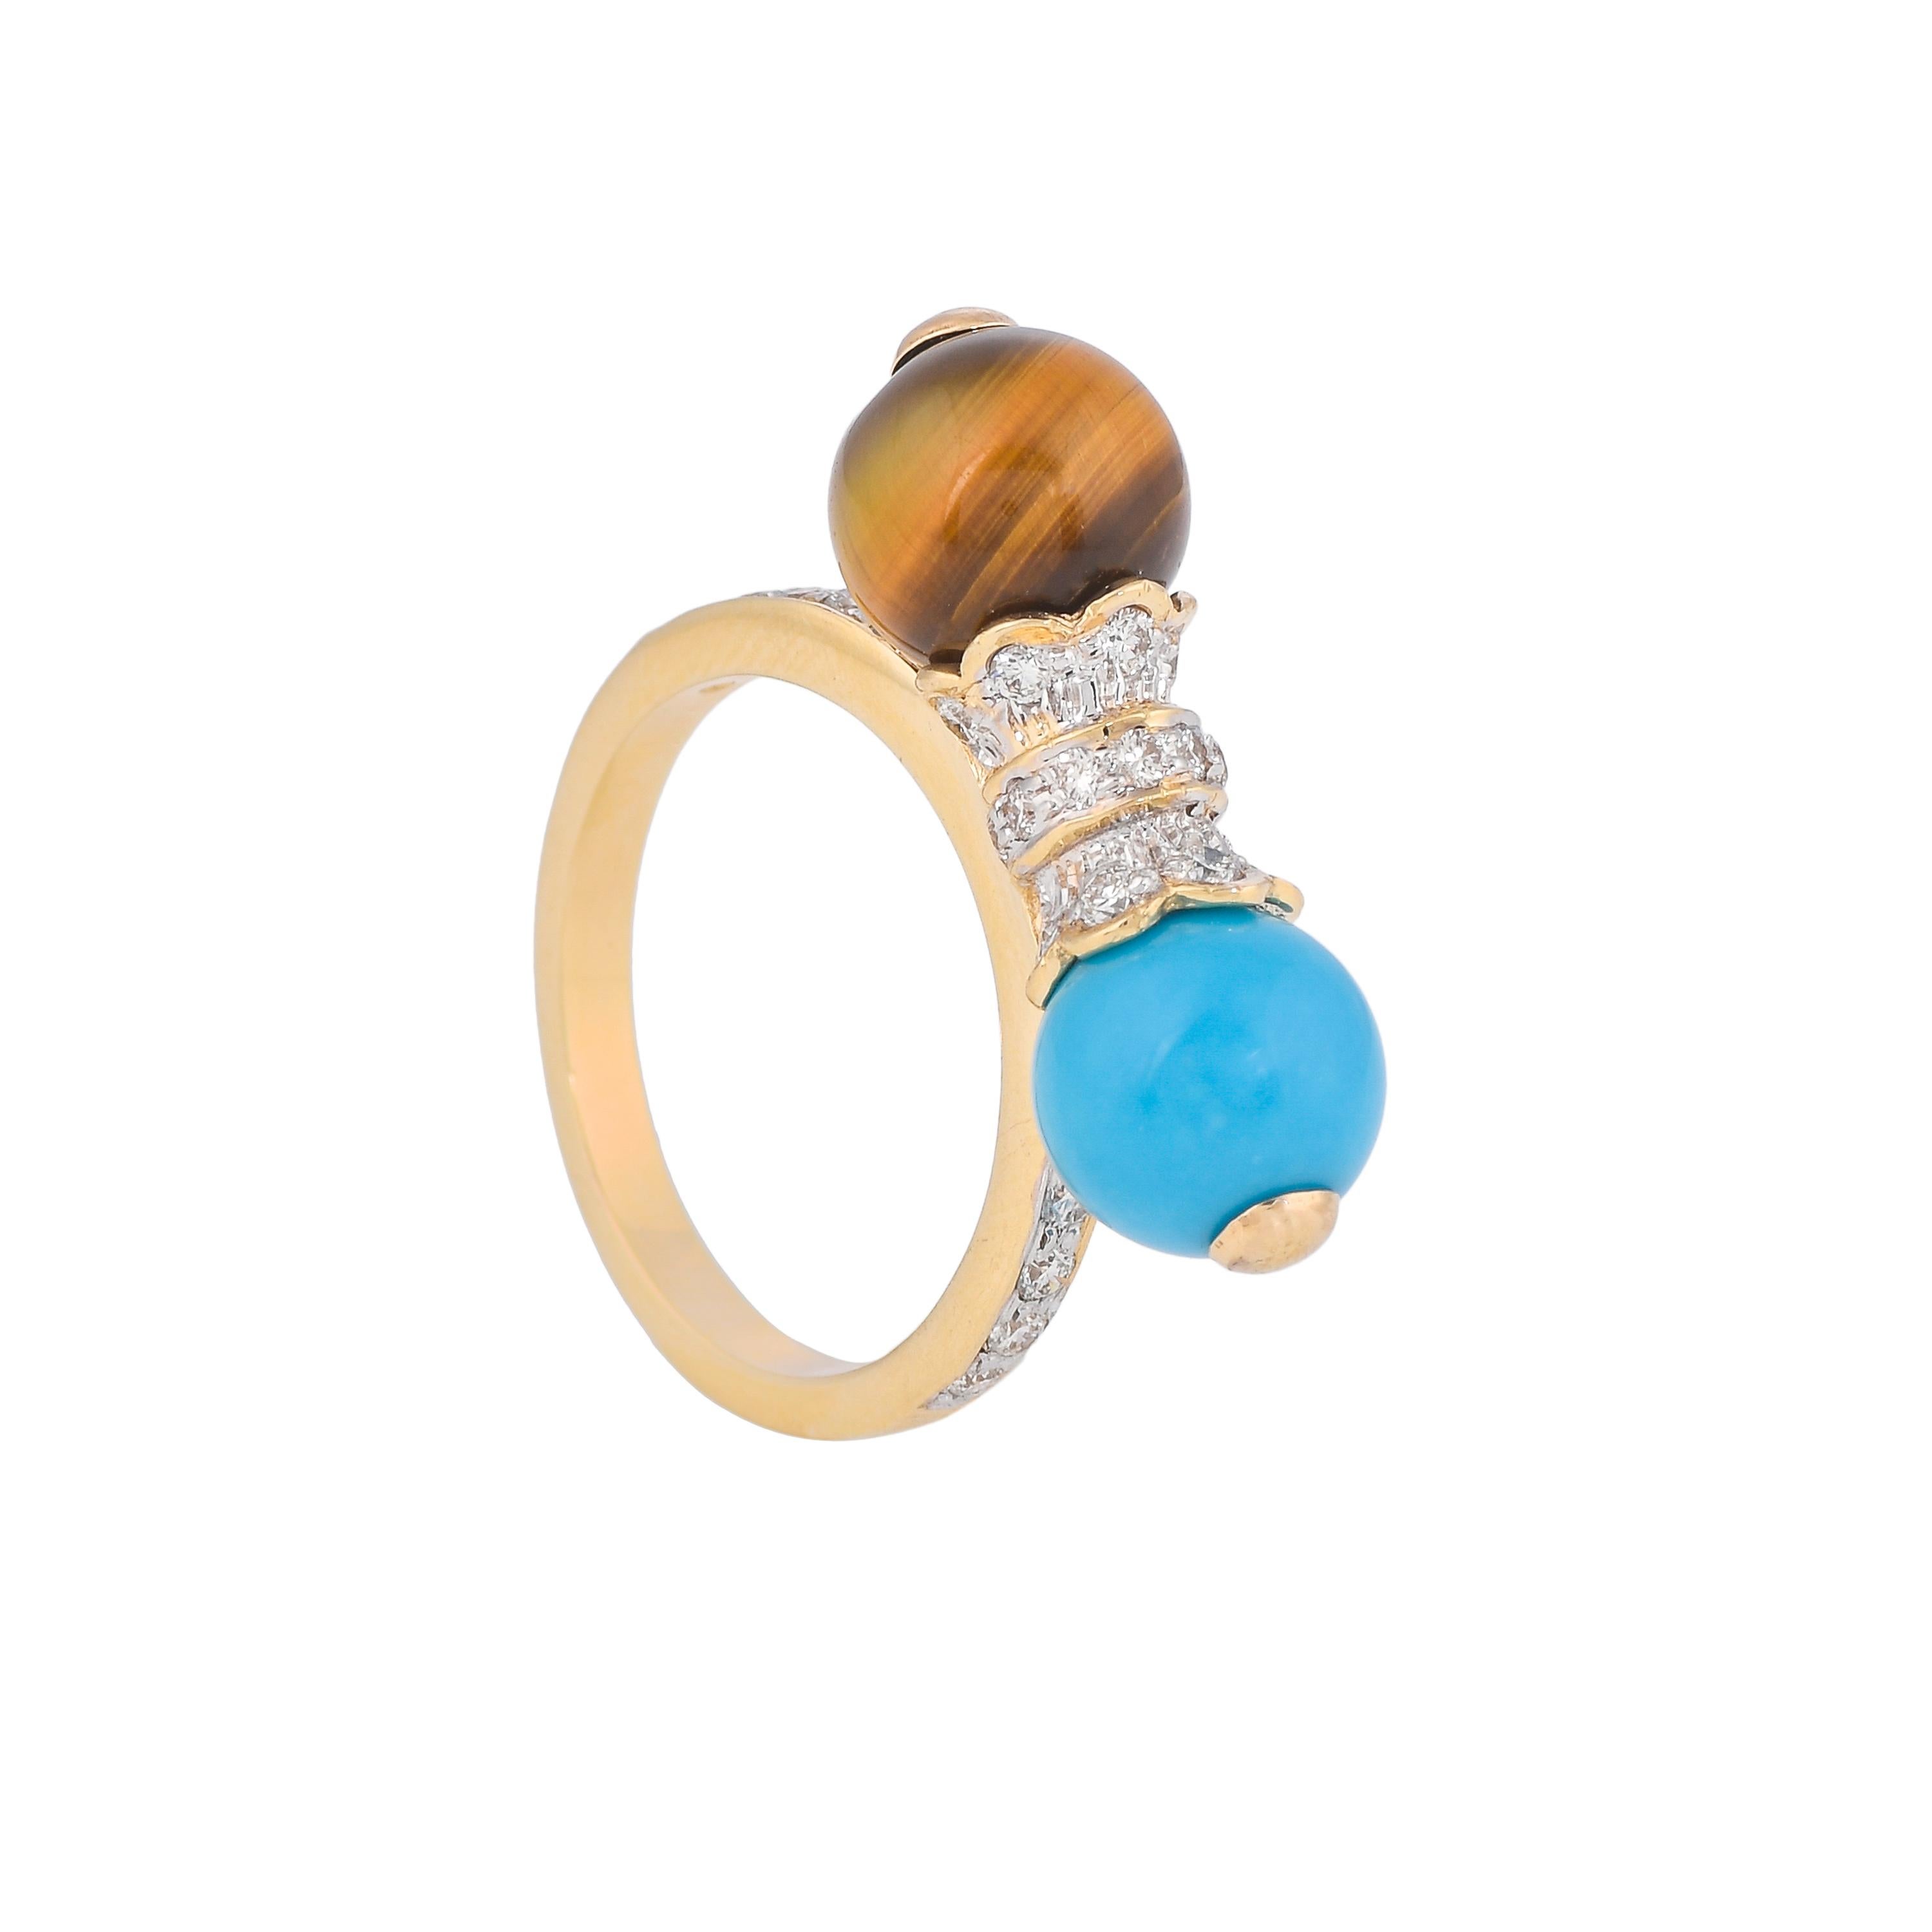 4.17 Carats Tigers Eye Turquoise and Diamond 18kt Yellow Gold Ring In New Condition For Sale In Jaipur, Jaipur